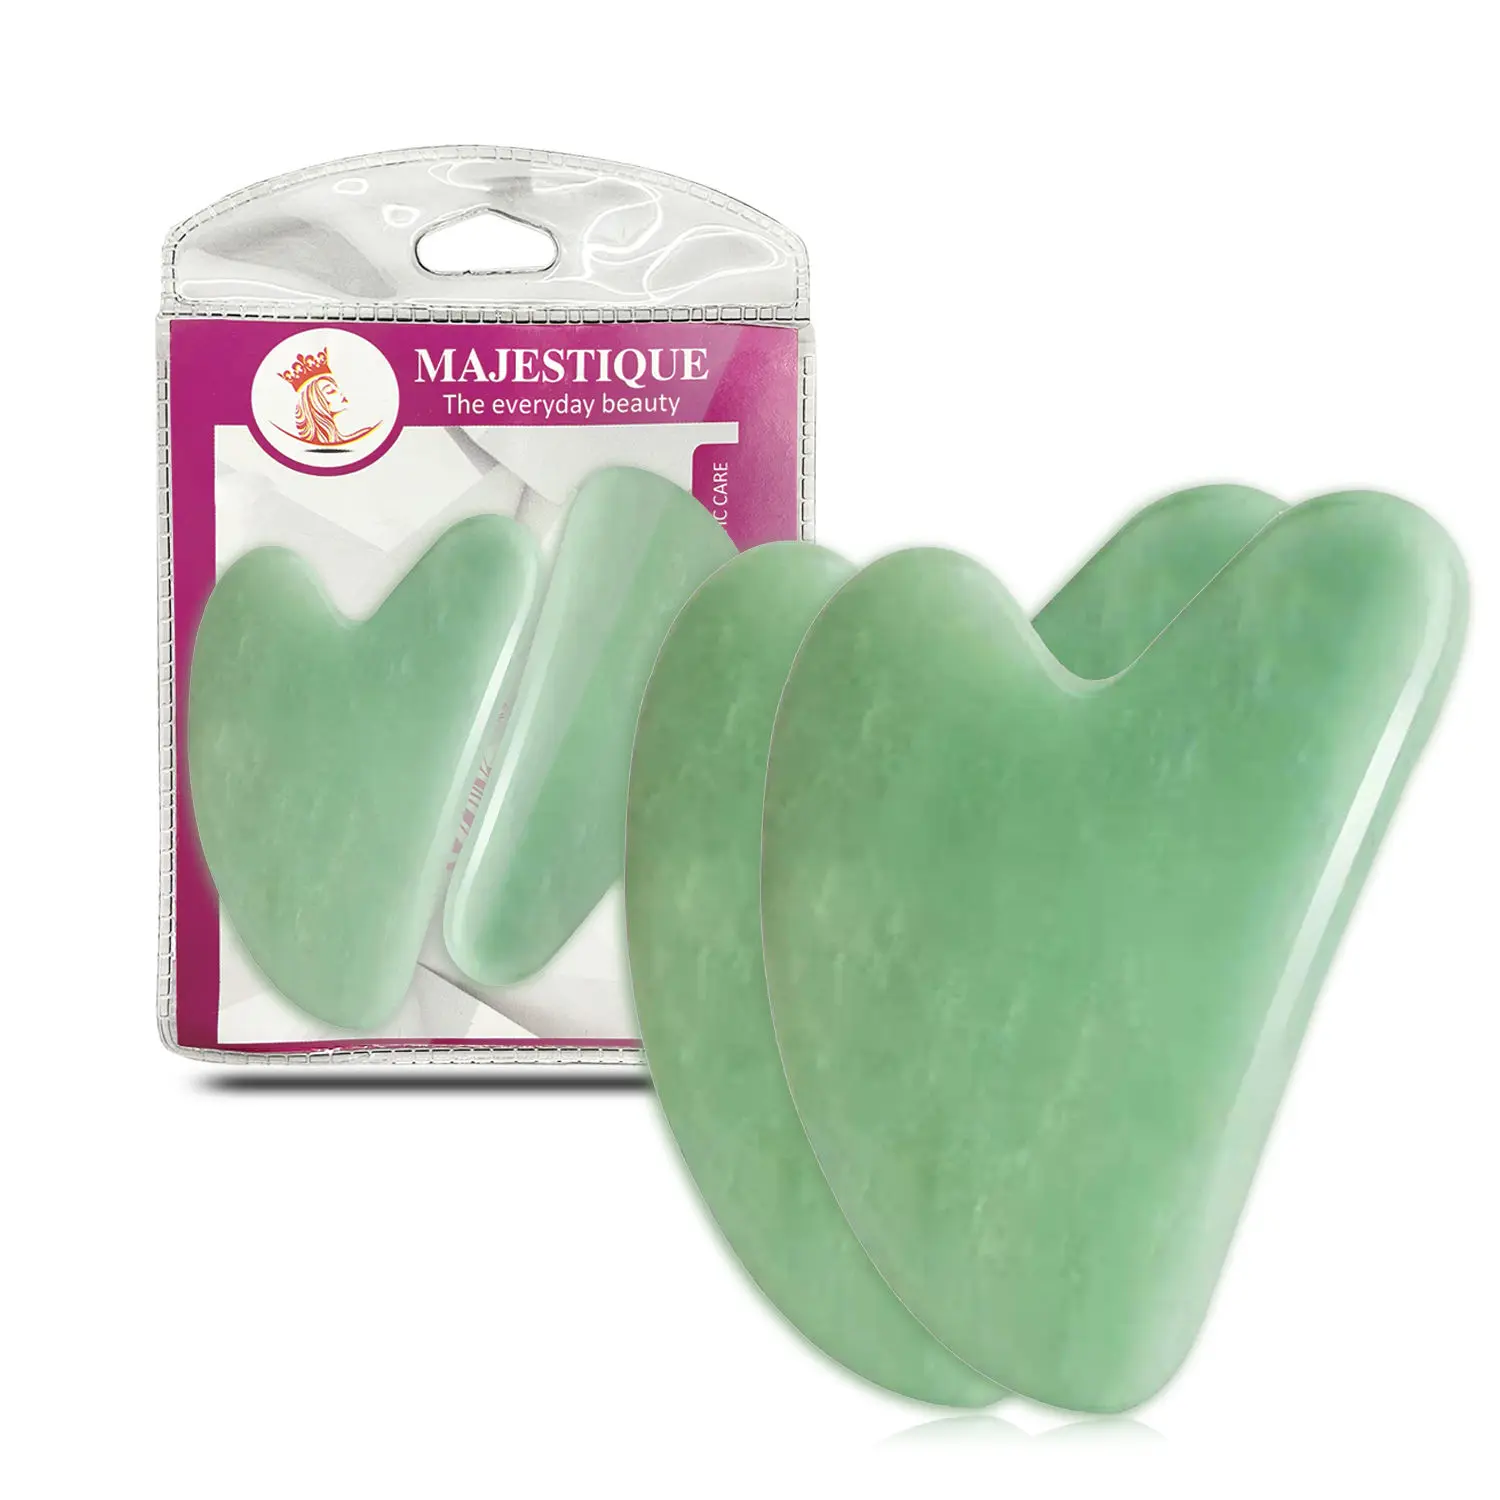 Majestique 2Pcs Gua Sha Face Refresher - Color May Vary